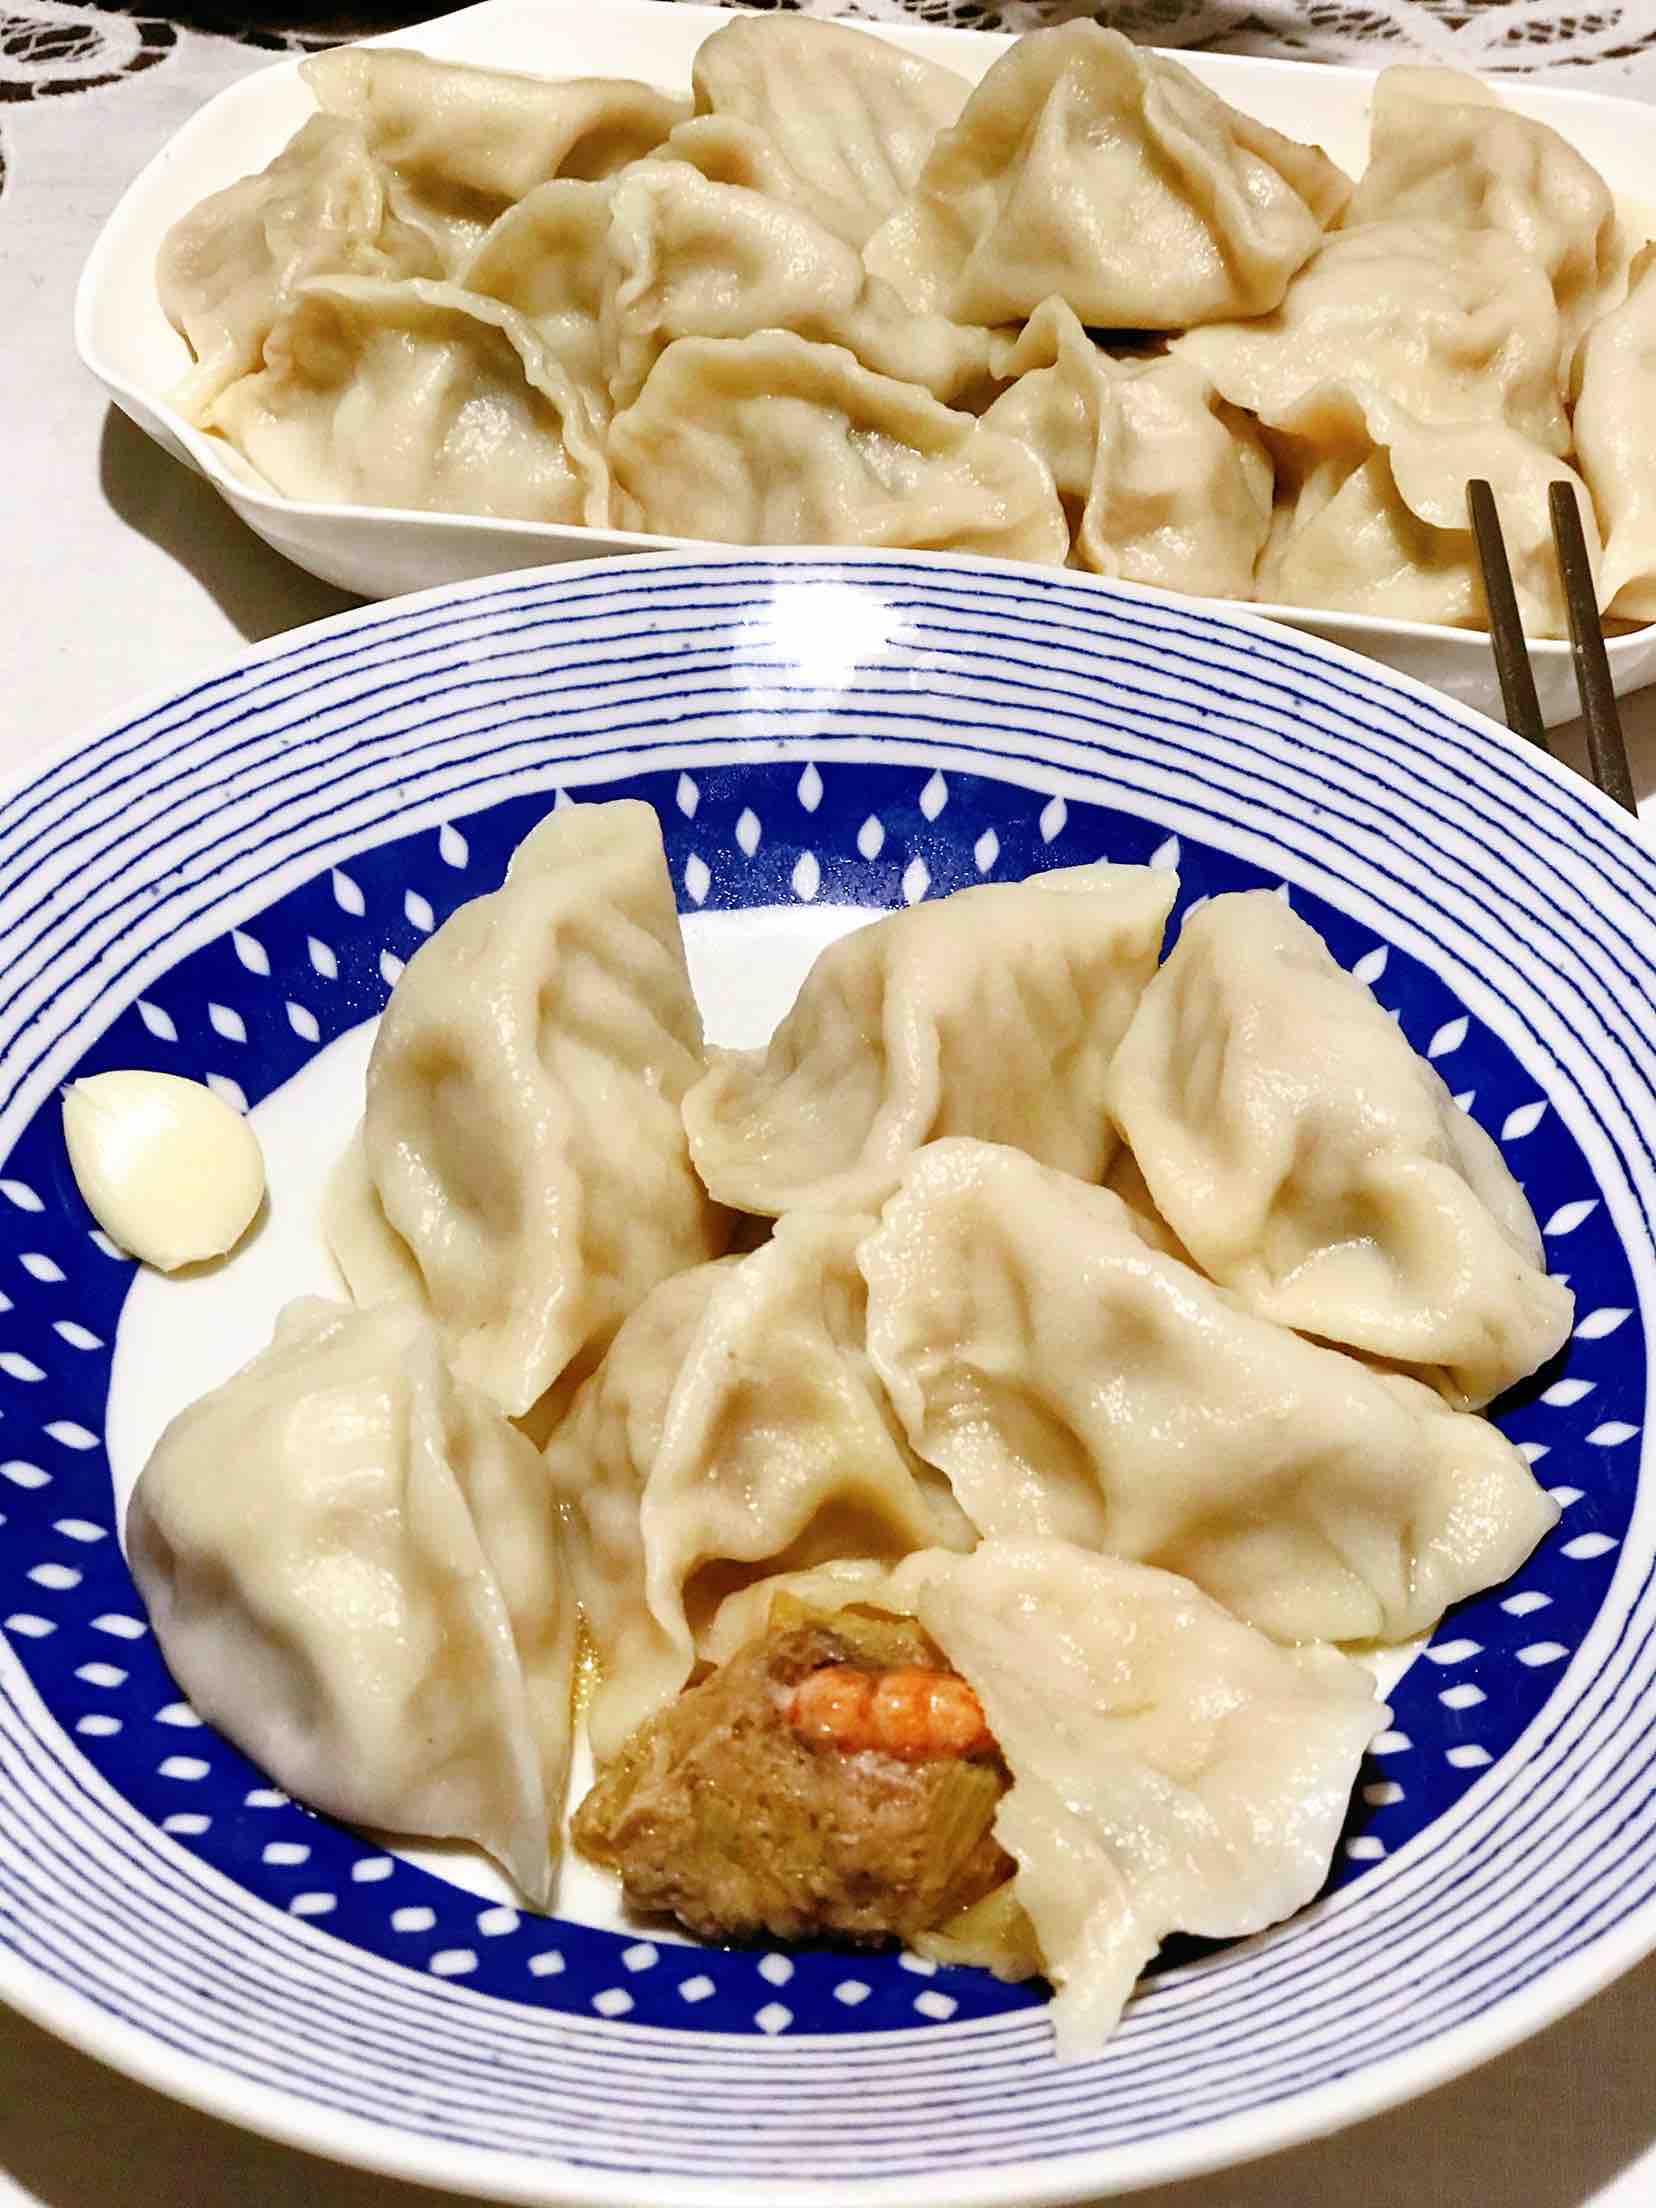 Big and Delicious Pork, Shrimp and Kidney Bean Dumplings with Thin Skin Stuffing